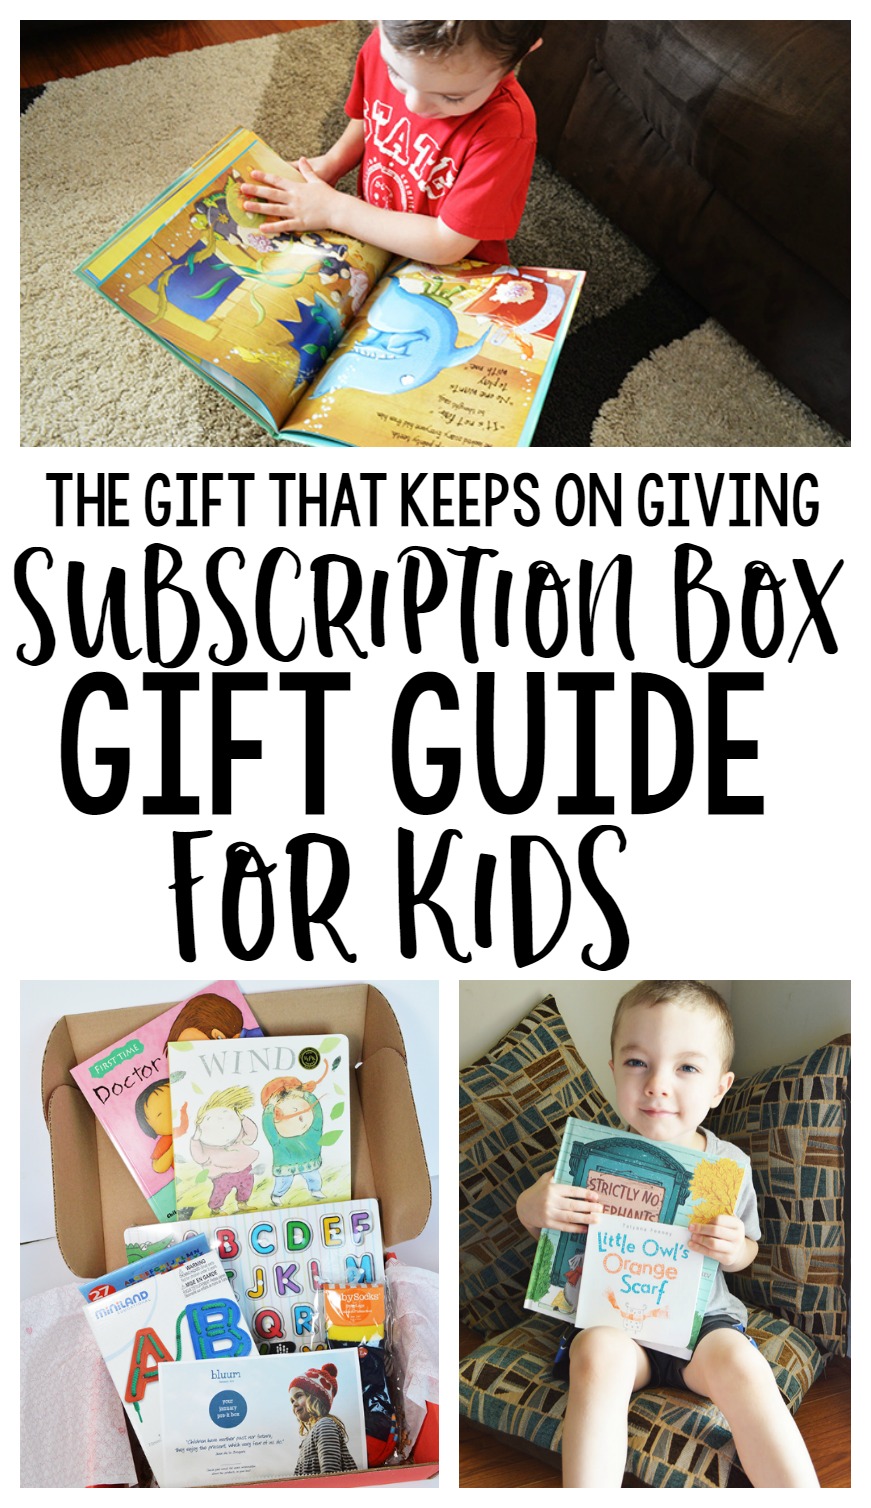 The Gift That Keeps On Giving - Subscription Box Gift Ideas for Kids